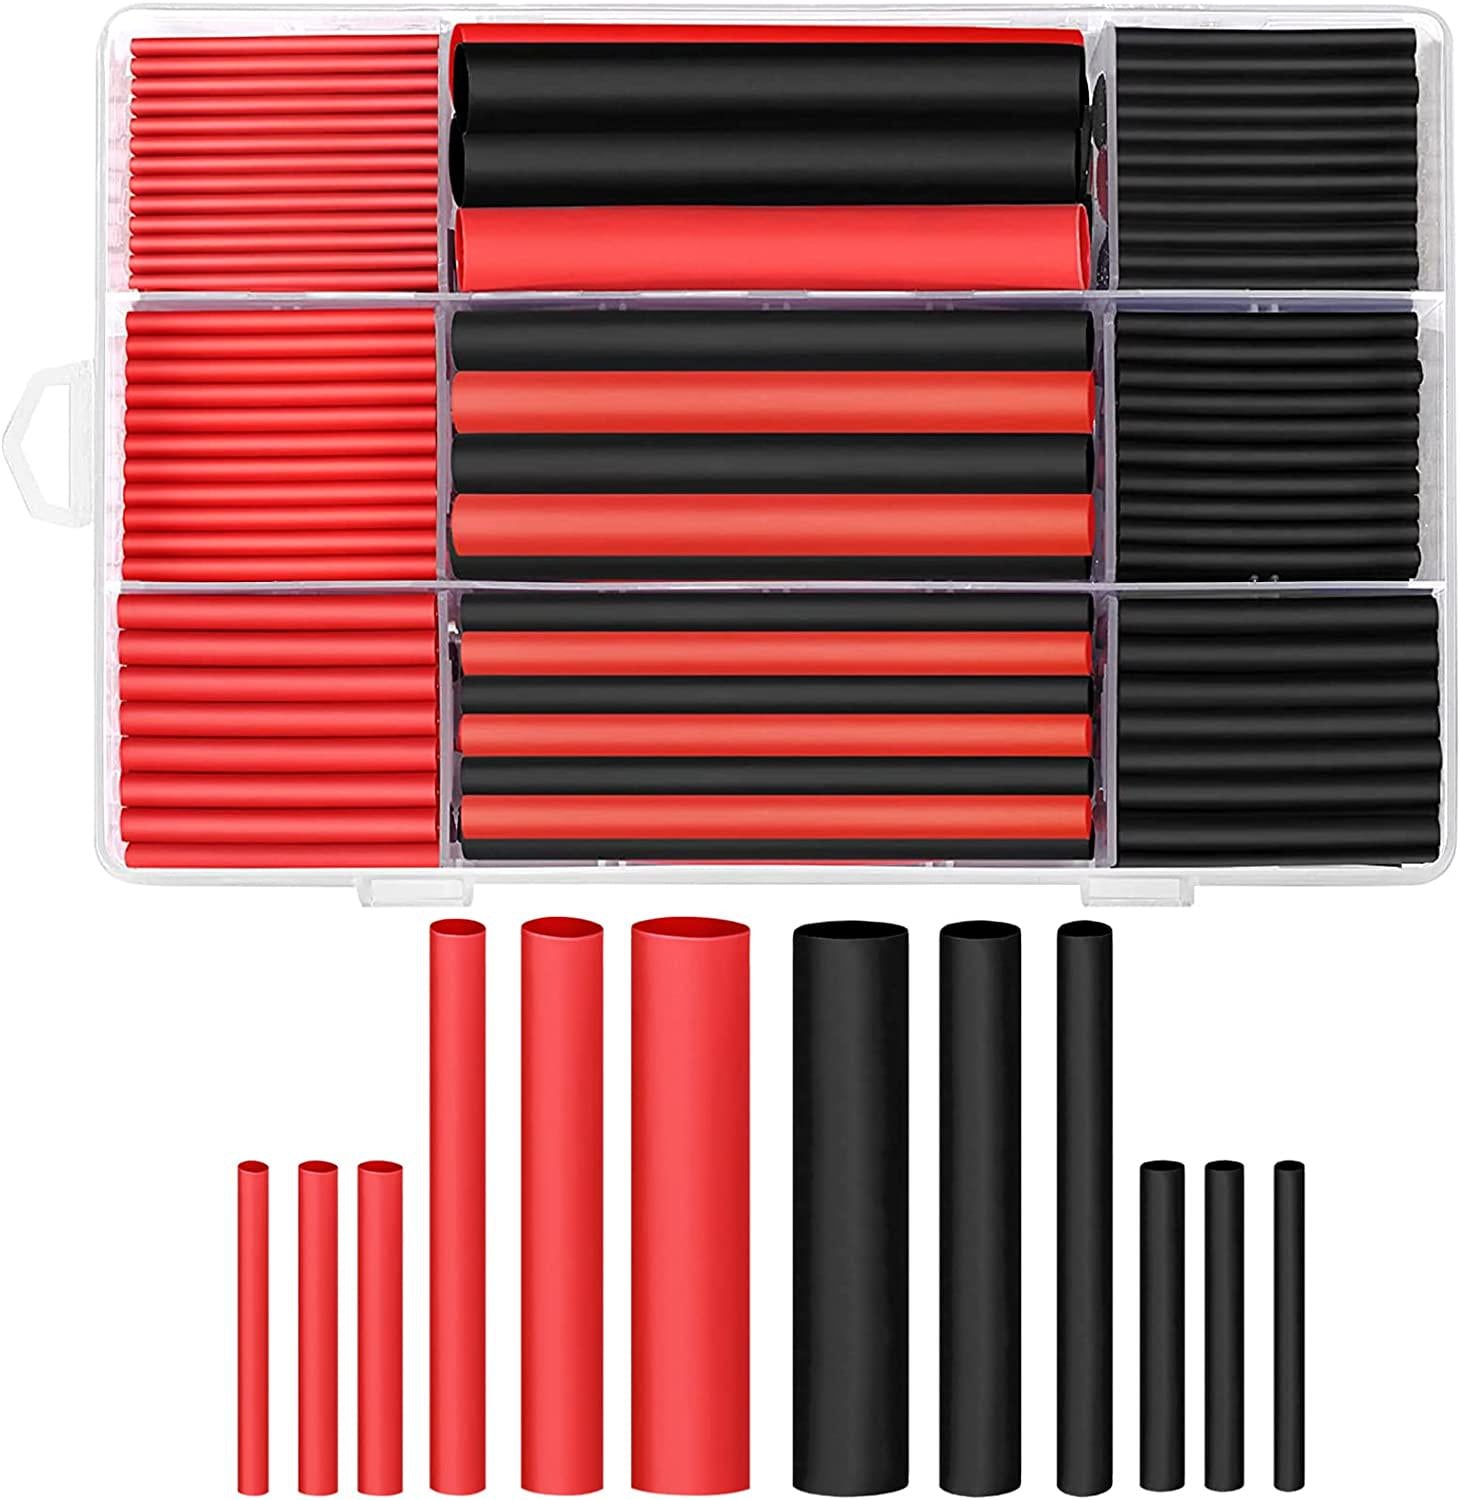 Ginsco, Ginsco 270Pcs 3:1 Shrink Ratio Dual Wall Adhesive Lined Heat Shrink Tubing Tube 6 Size 2 Color Kit Black Red